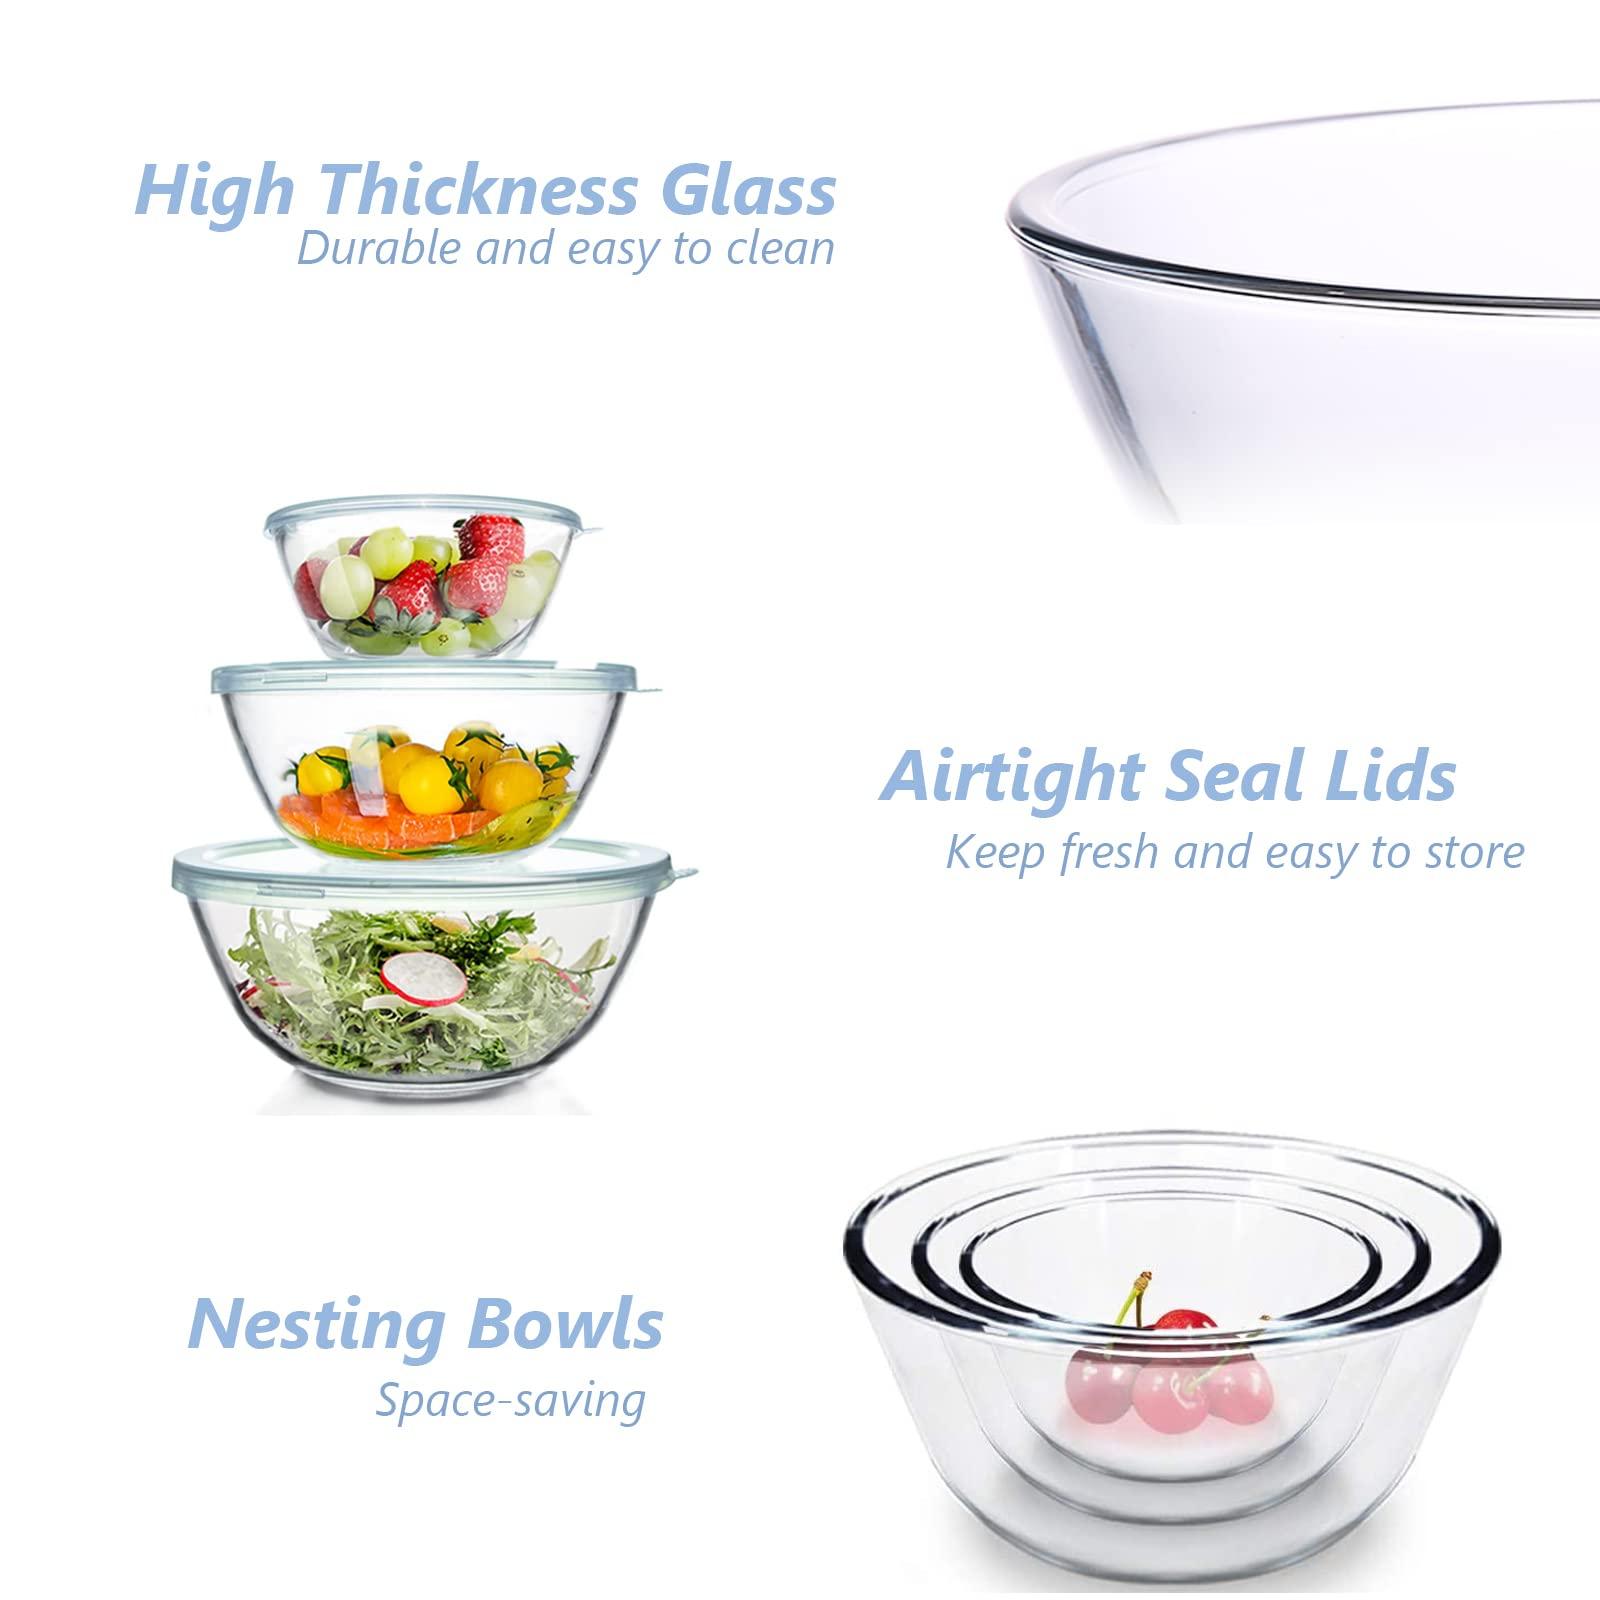 WhiteRhino Glass Mixing Bowls with Lids Set of 3（4.5QT,2.7QT, 1.1QT, Large Kitchen Salad Bowls, Space-Saving Nesting Bowls, Round Glass Serving Bowls for Cooking,Baking,Prepping,Dishwasher Safe - CookCave